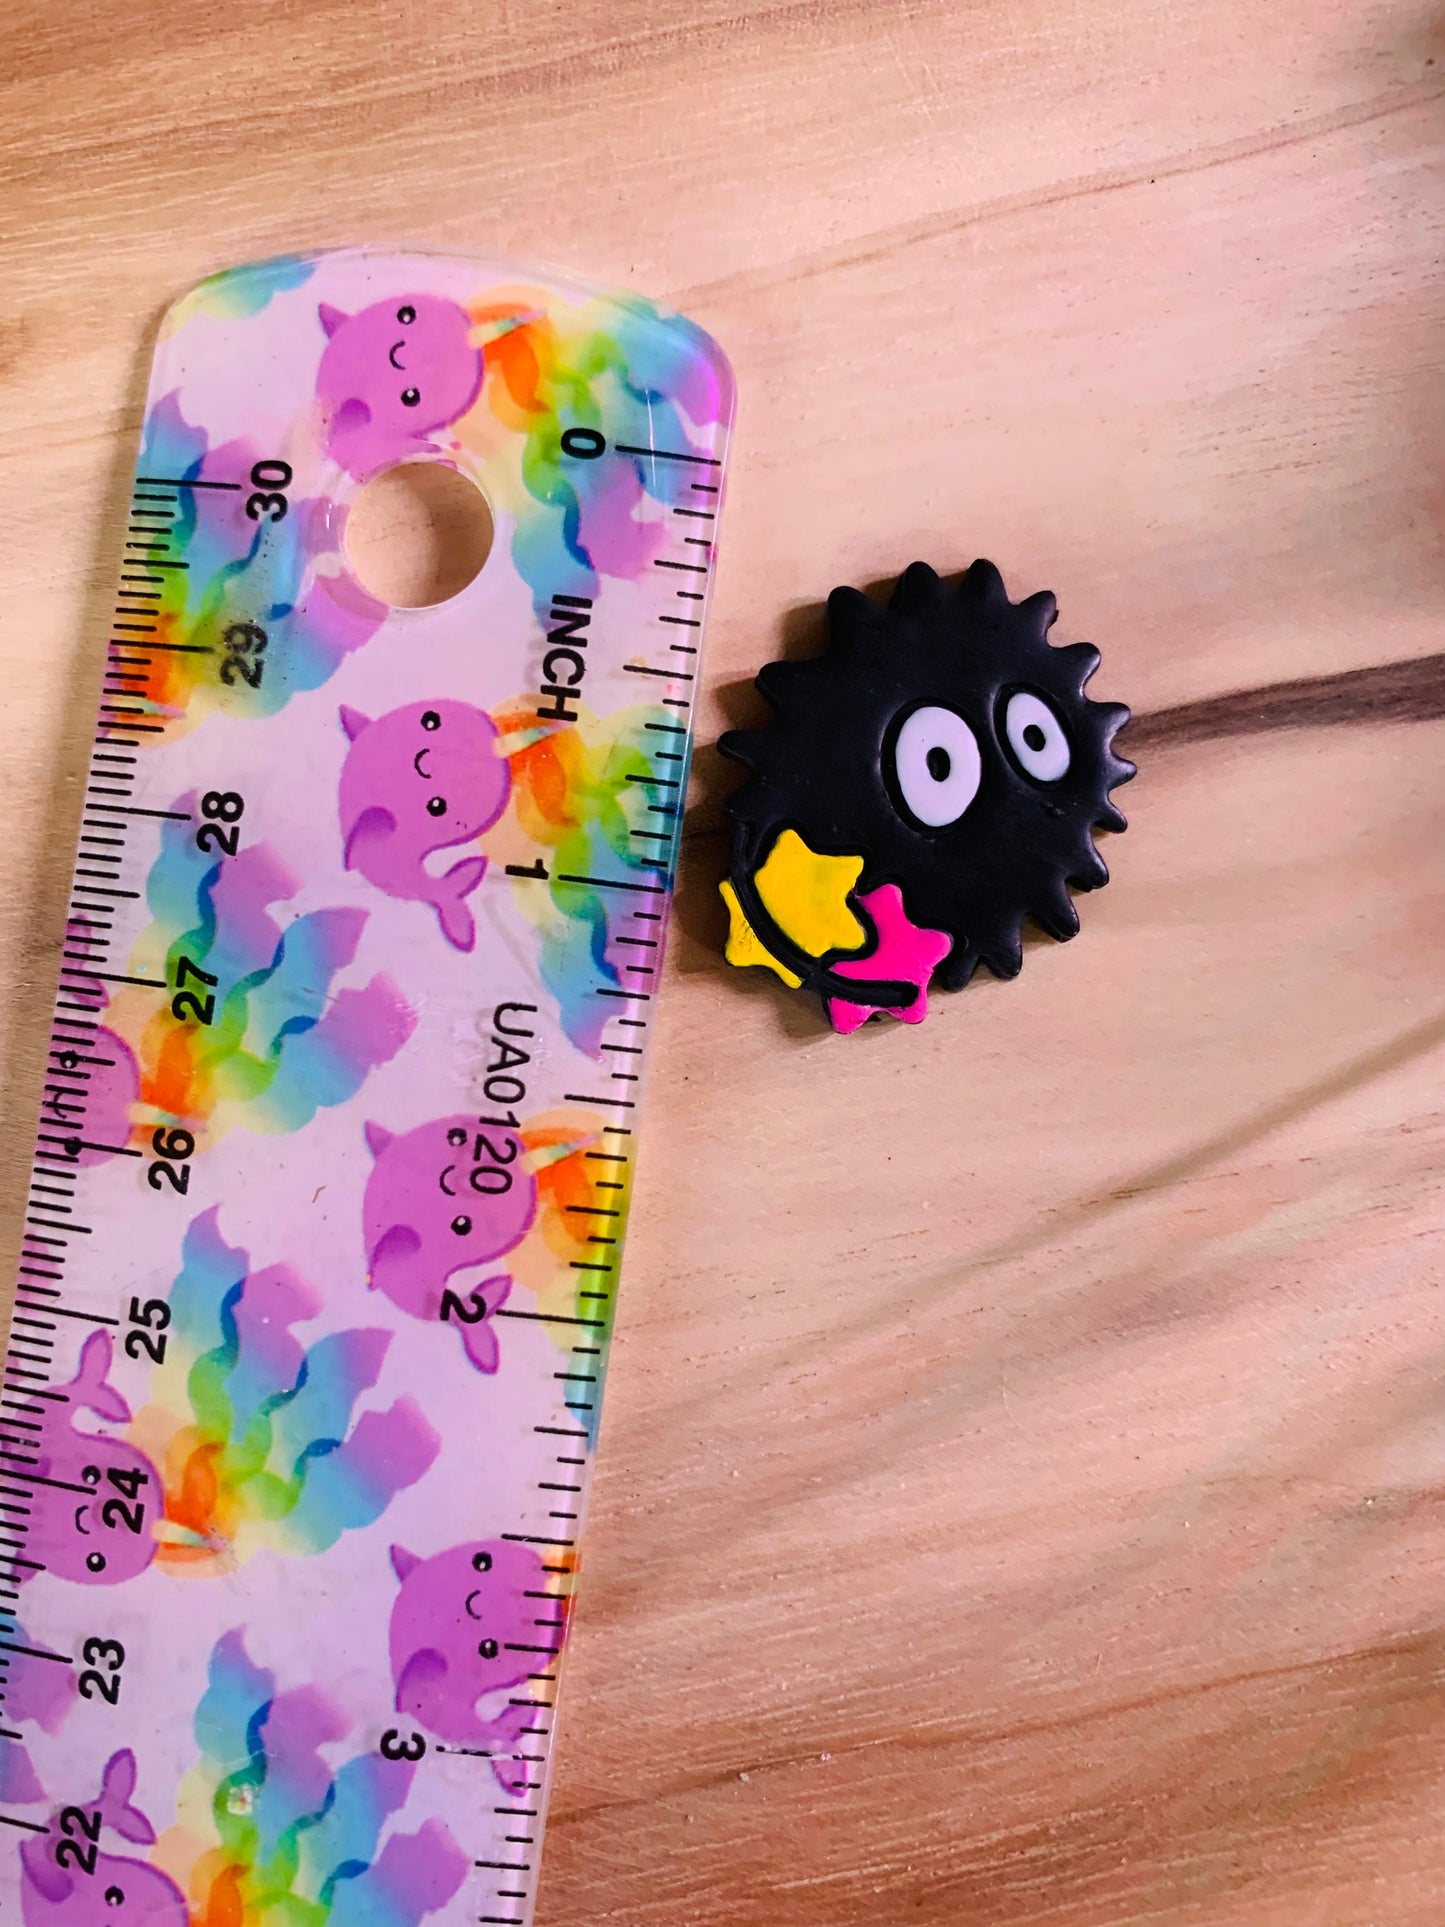 Oversized Fuzz Ball Soot Sprite Clutching Star Toys Earring Clay Cutter